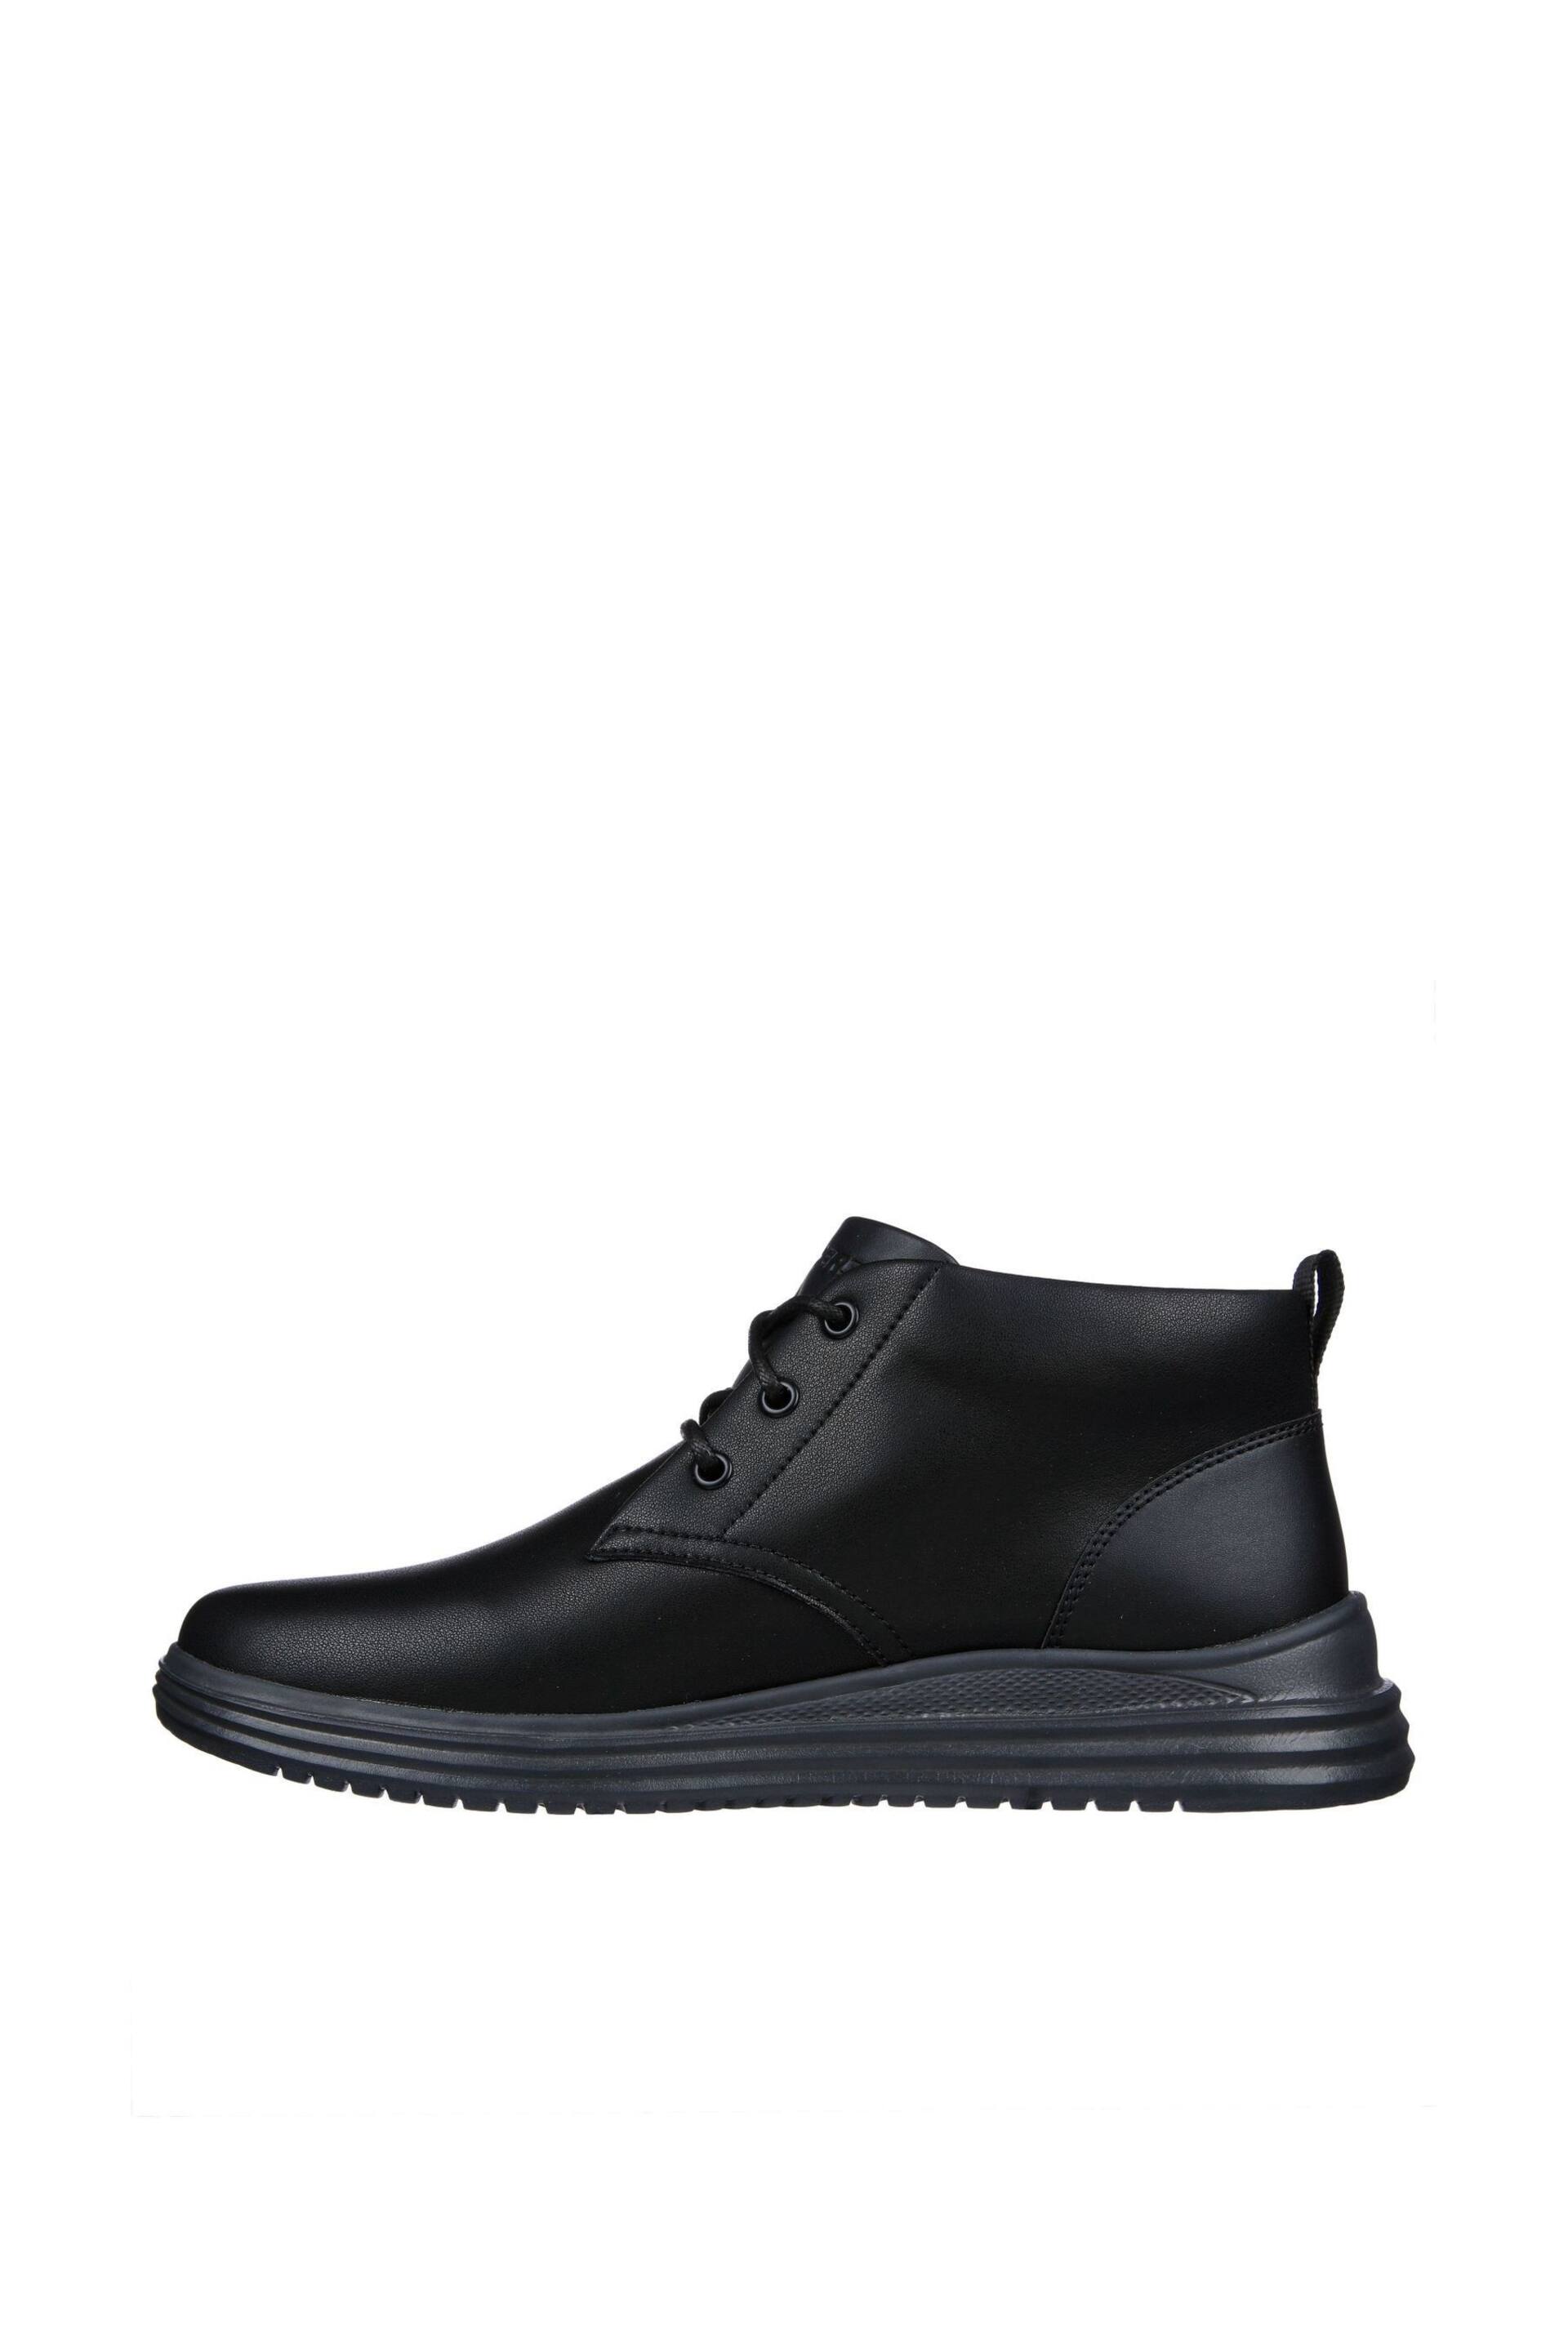 Skechers Black Proven Mens Boots - Image 3 of 5